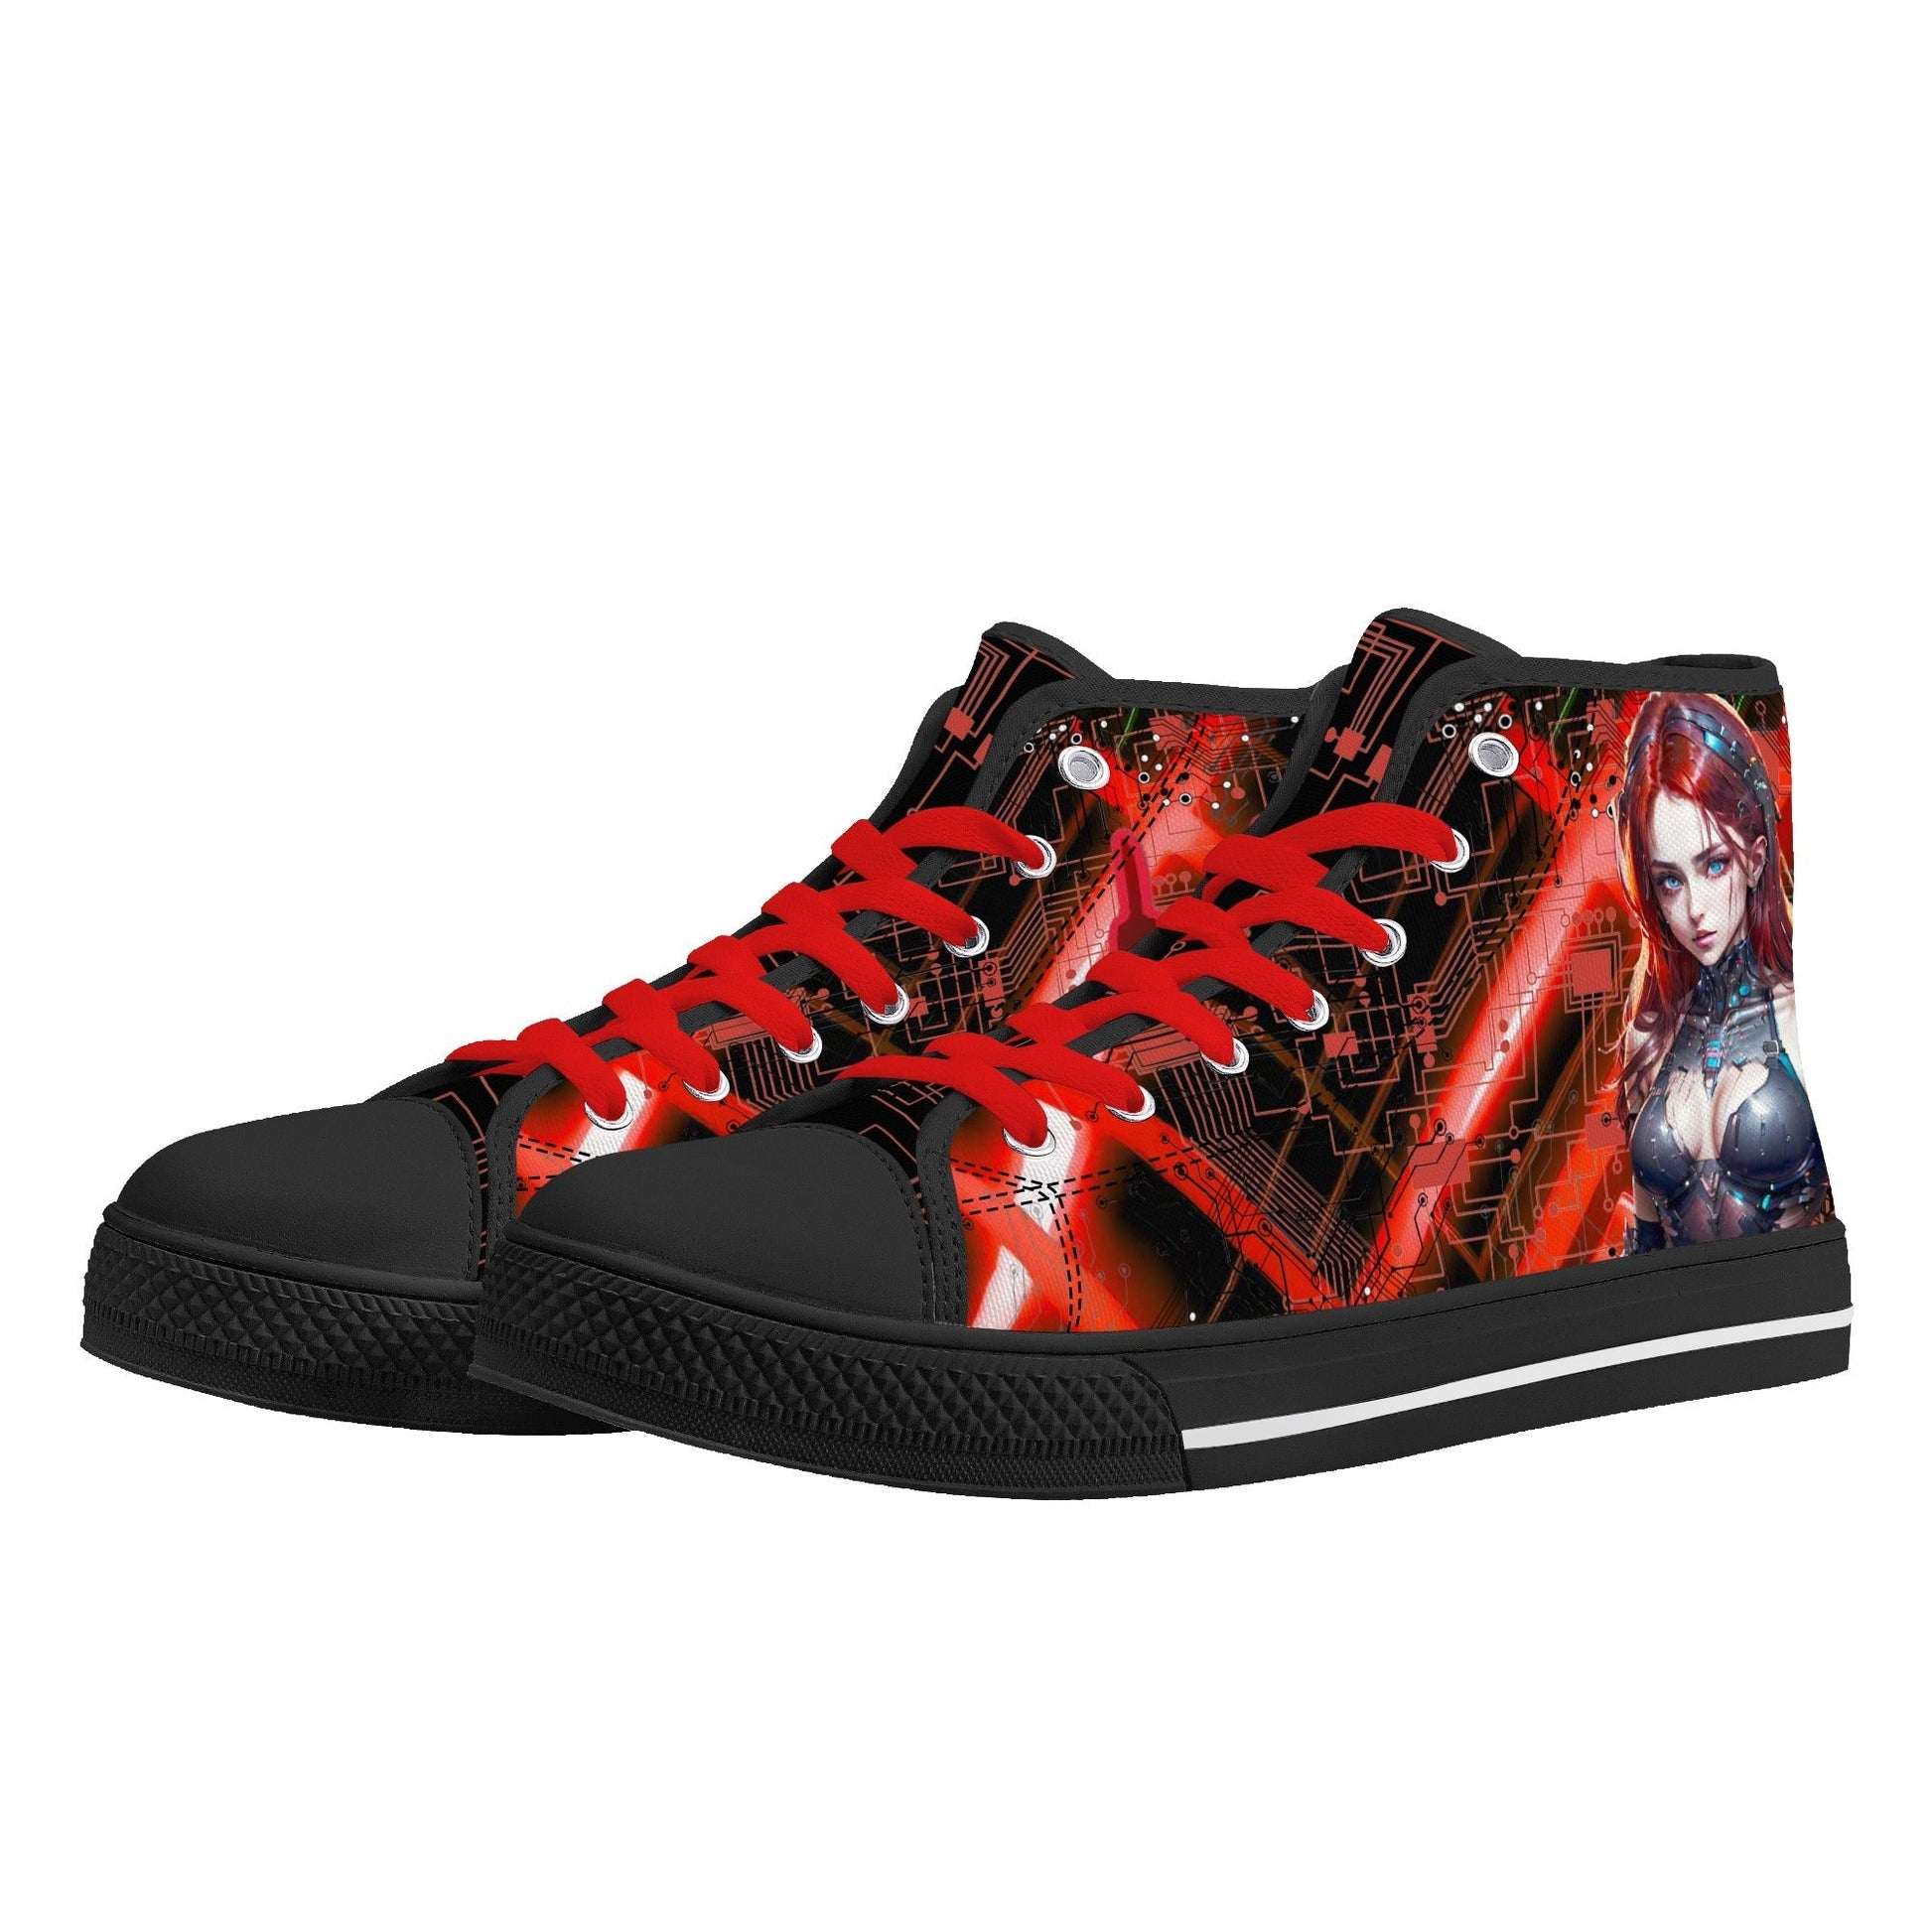 Stand out  with the  Overload Mens High Top Canvas Shoes  available at Hey Nugget. Grab yours today!